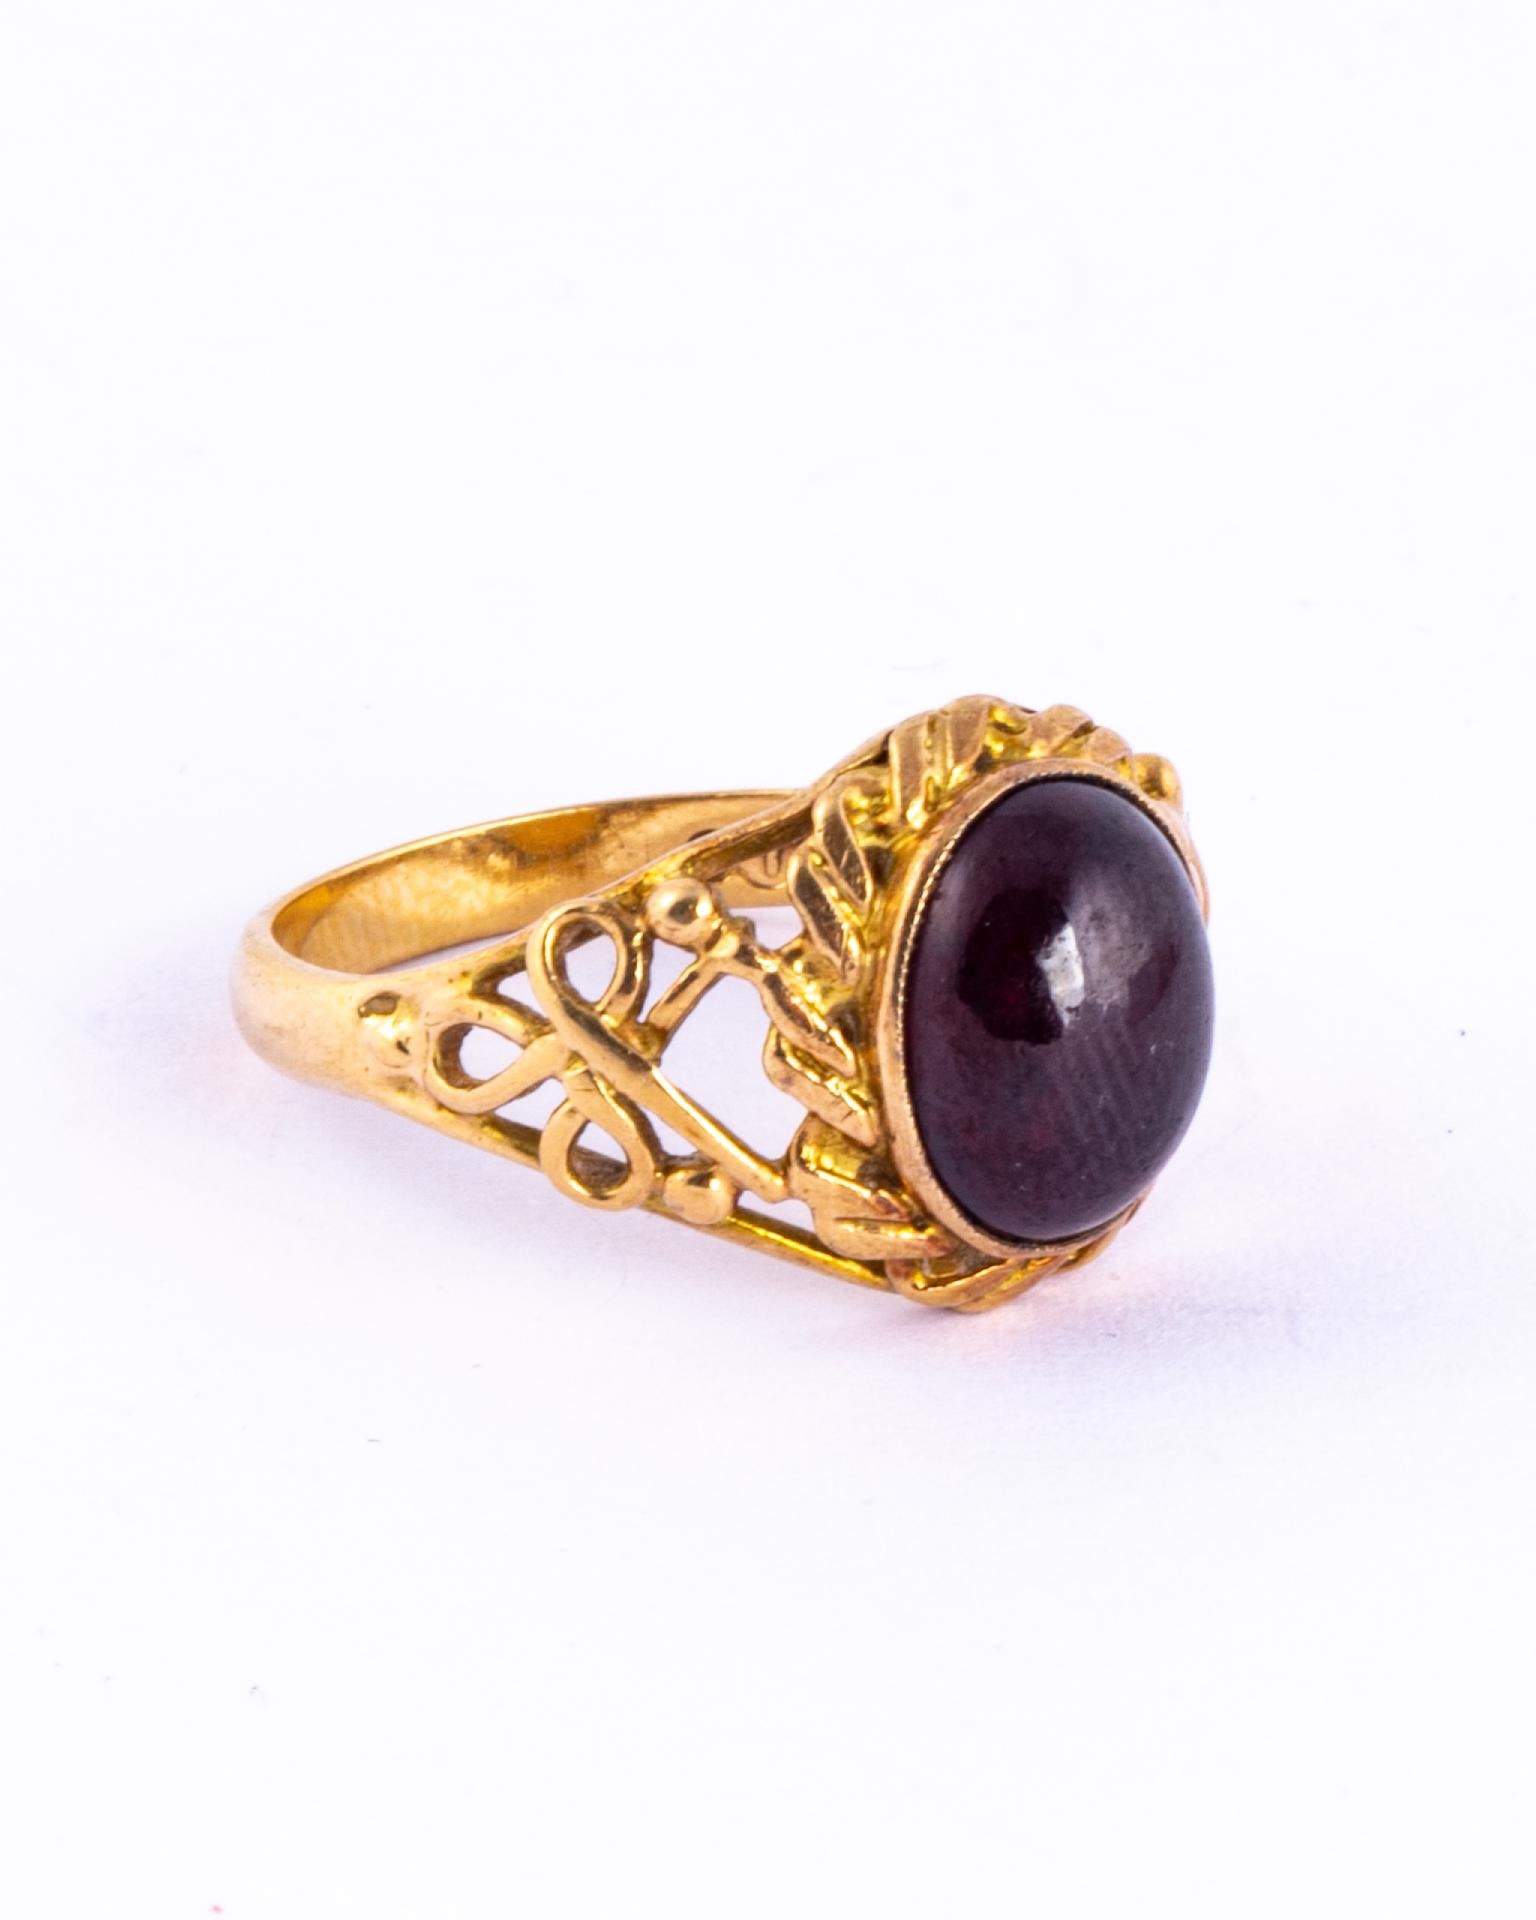 Set within this glossy 9ct gold ring is a gorgeous deep red cabochon garnet. The shoulders and setting are wonderfully ornate. 

Ring Size: M 1/2 or 6 1/2 
Stone Dimensions: 10x8mm 

Weight: 3.4g